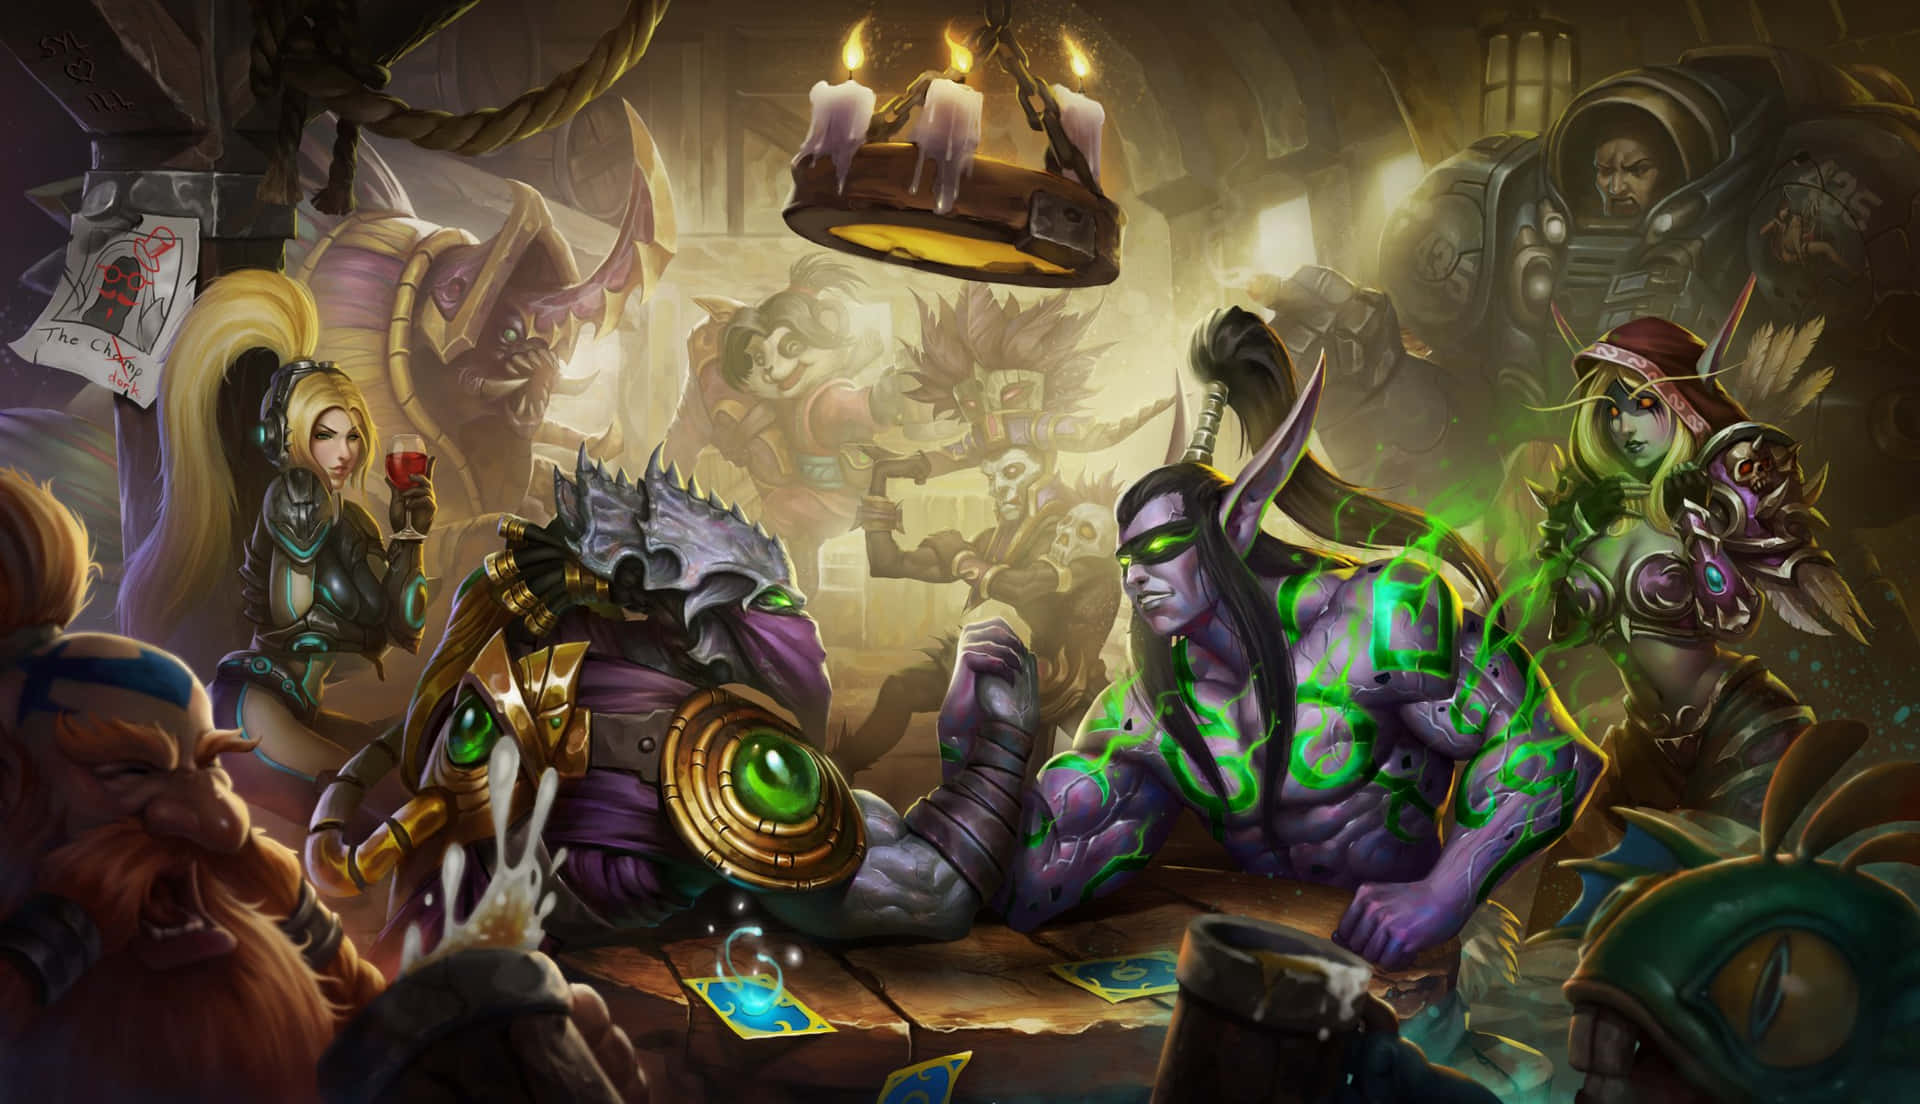 Feel the epic thrills of playing HD Hearthstone